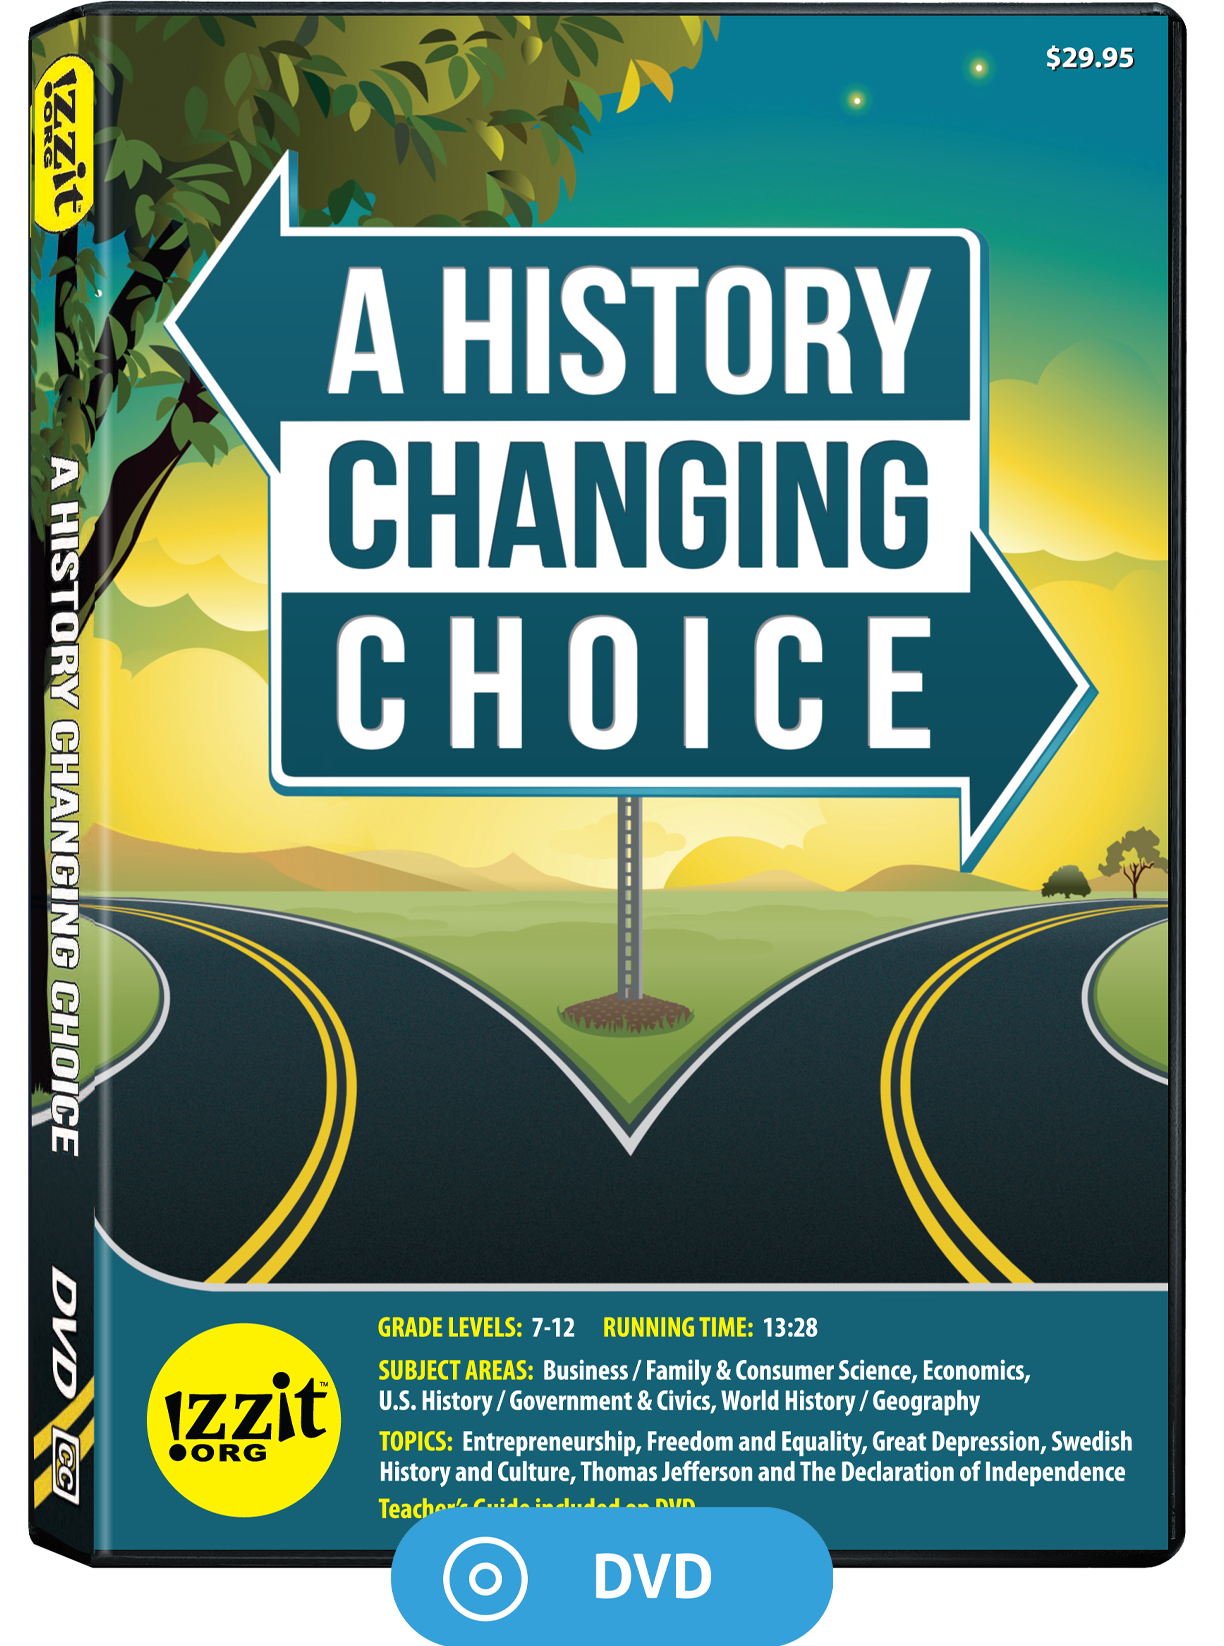 A History Changing Choice DVD